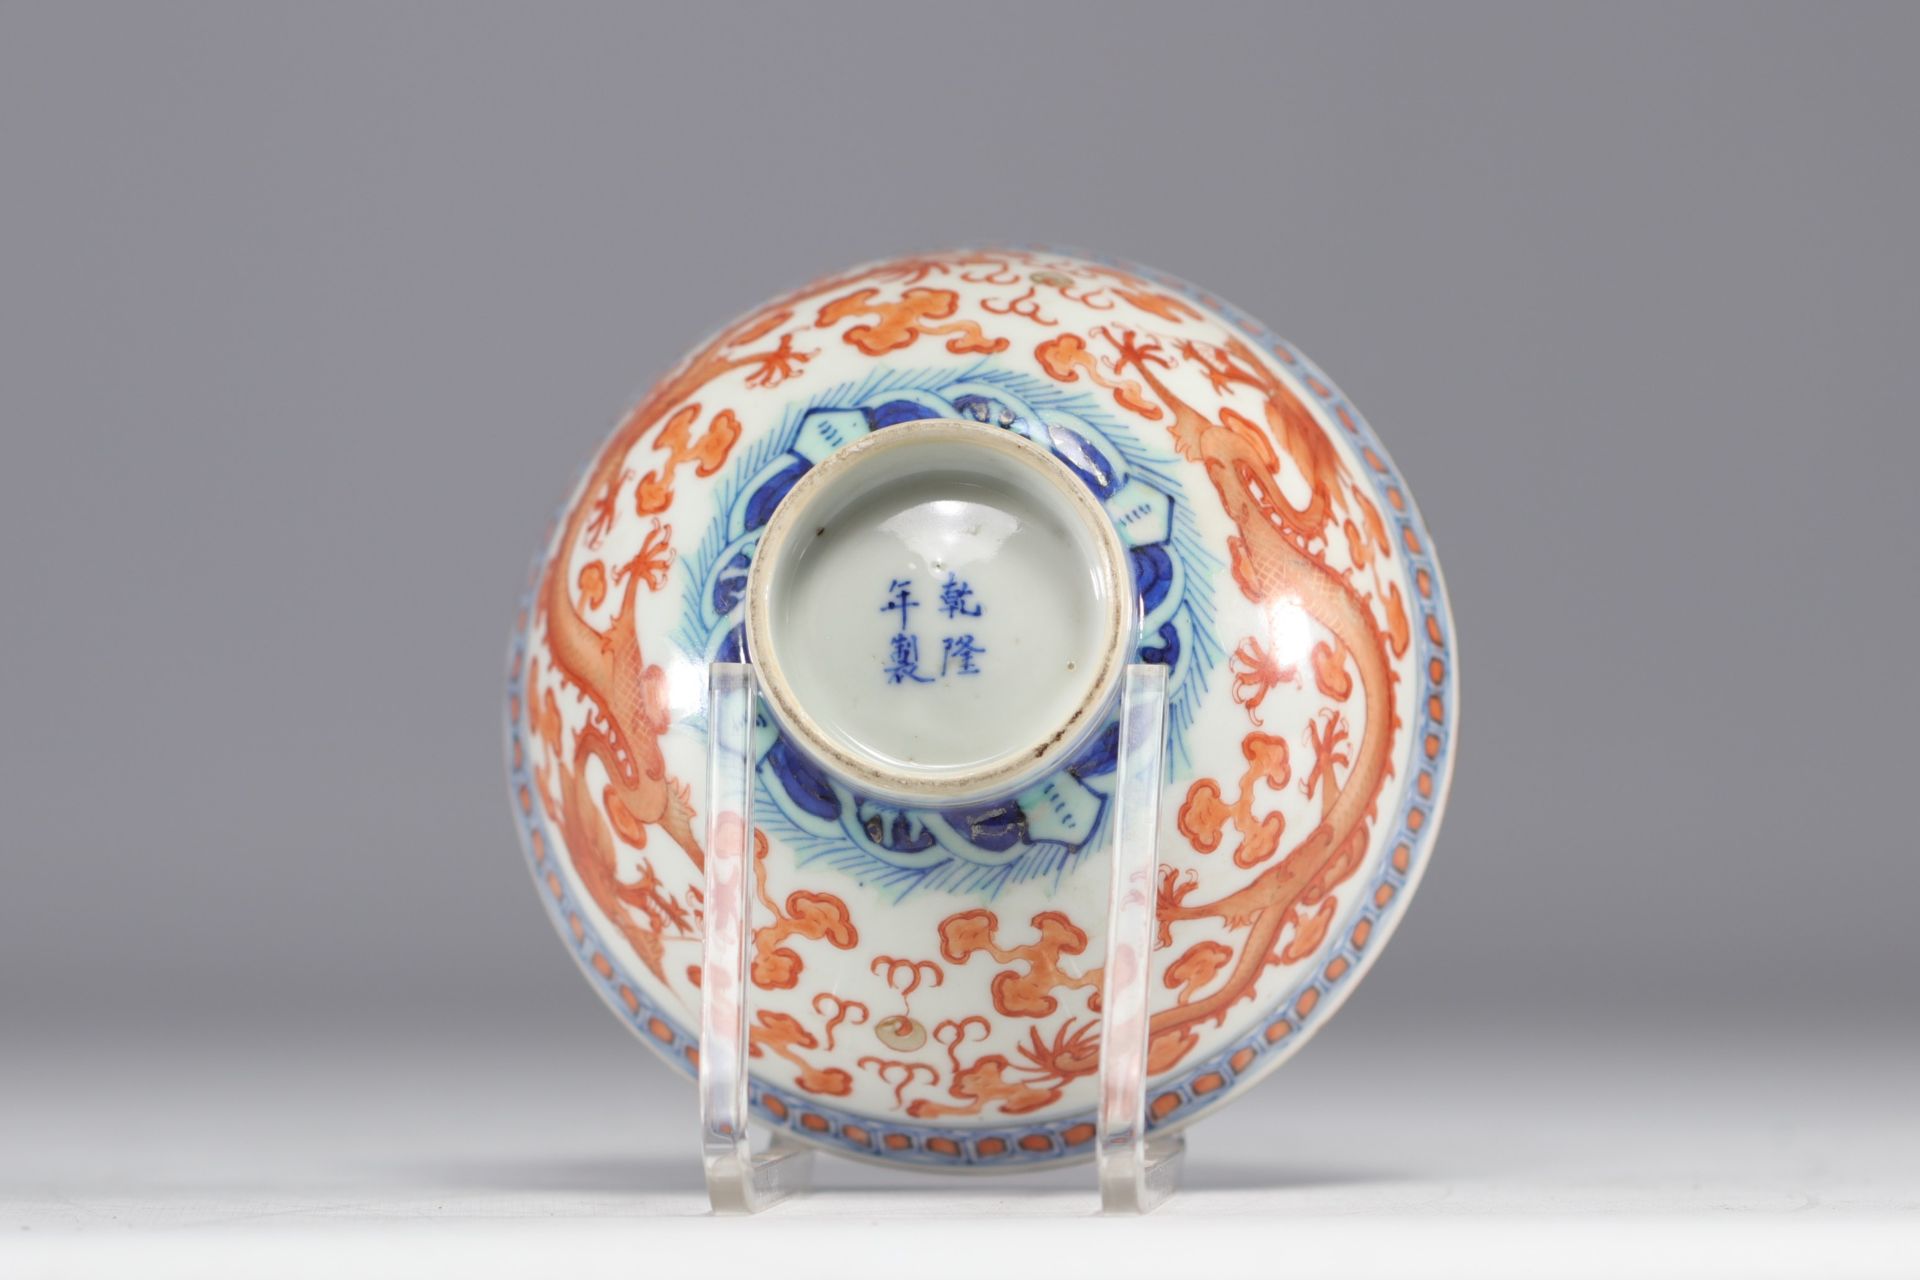 China - Porcelain bowl decorated with dragons with five claws, blue mark under the piece. - Image 3 of 6